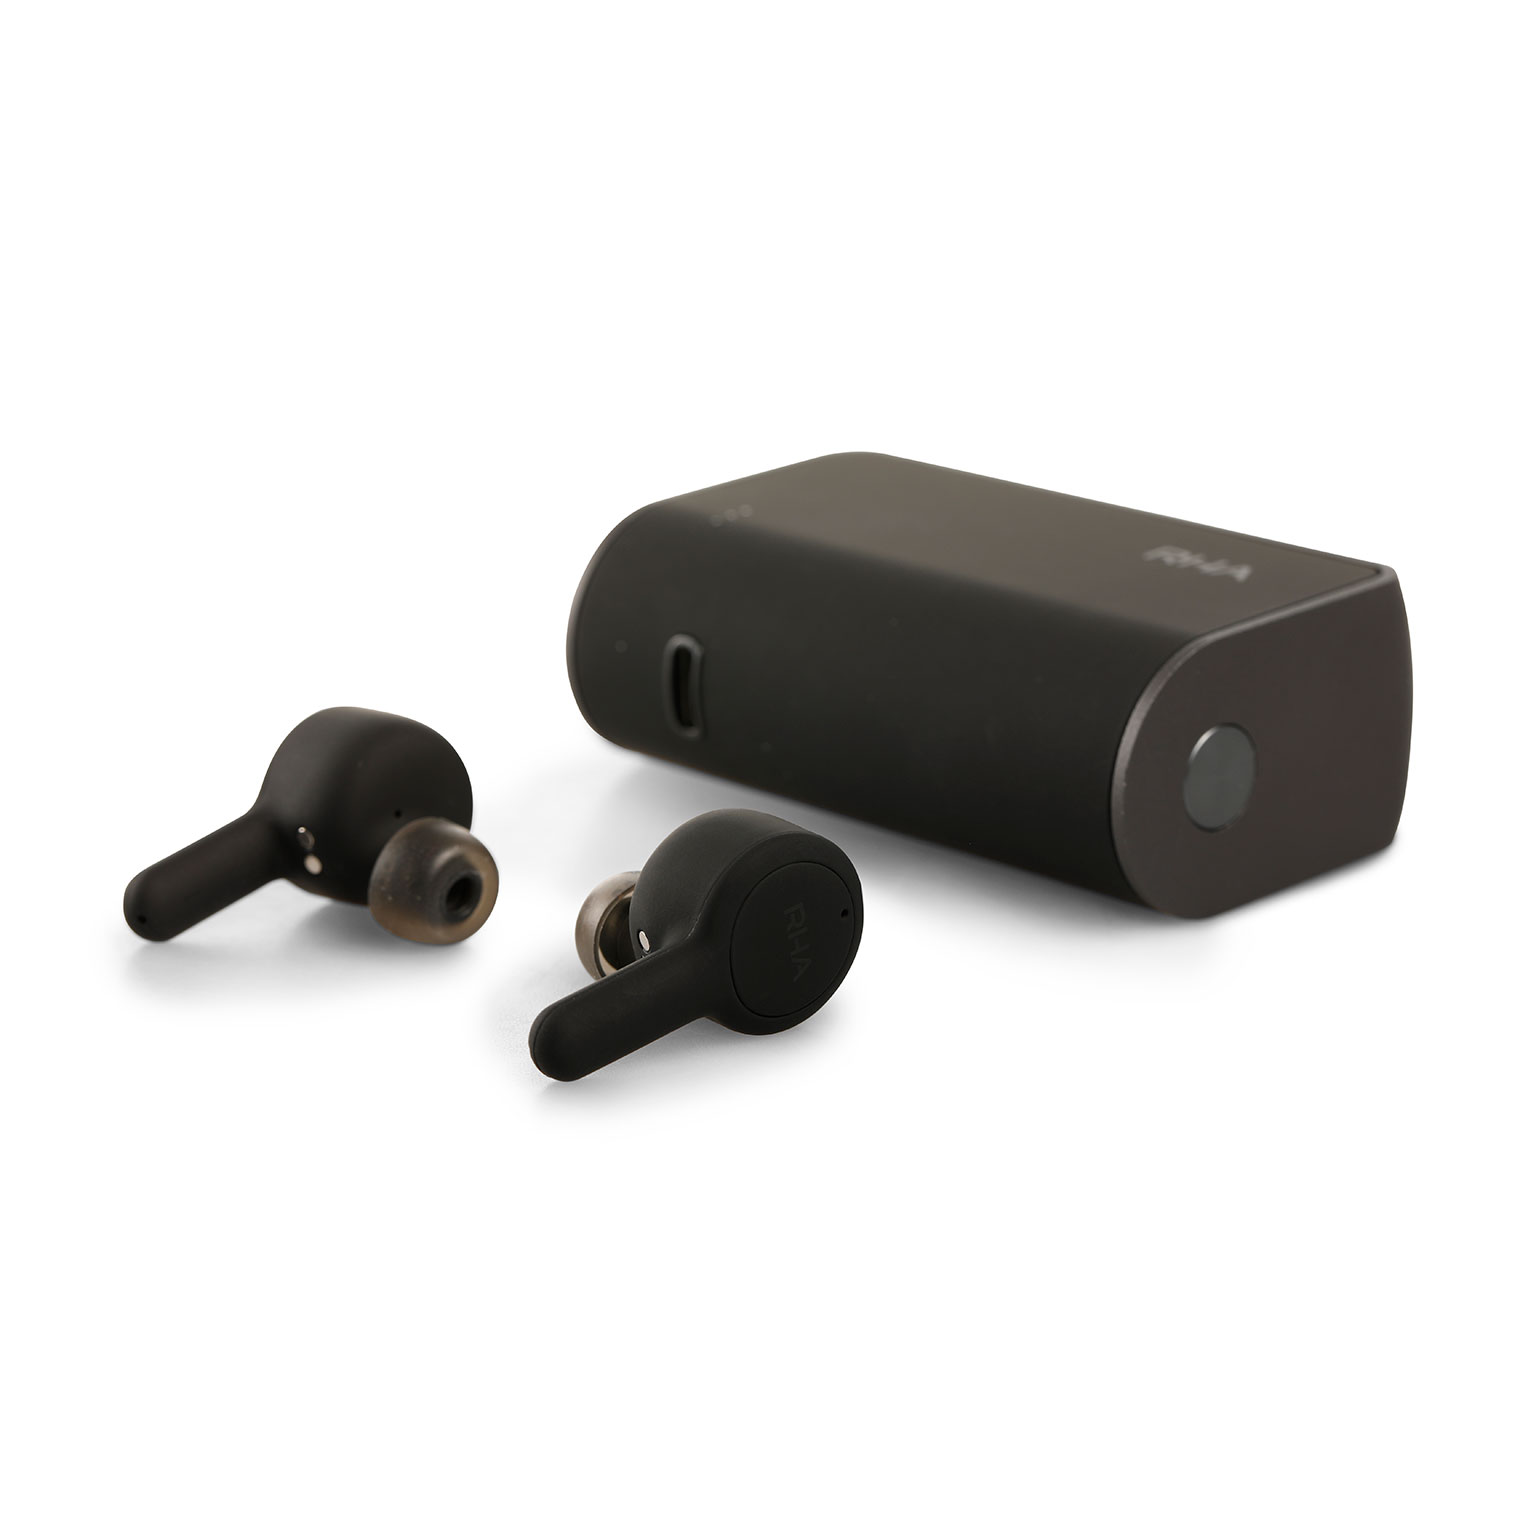 Rha TRUE CONNECT Wireless Headphones · Available at Los Angeles